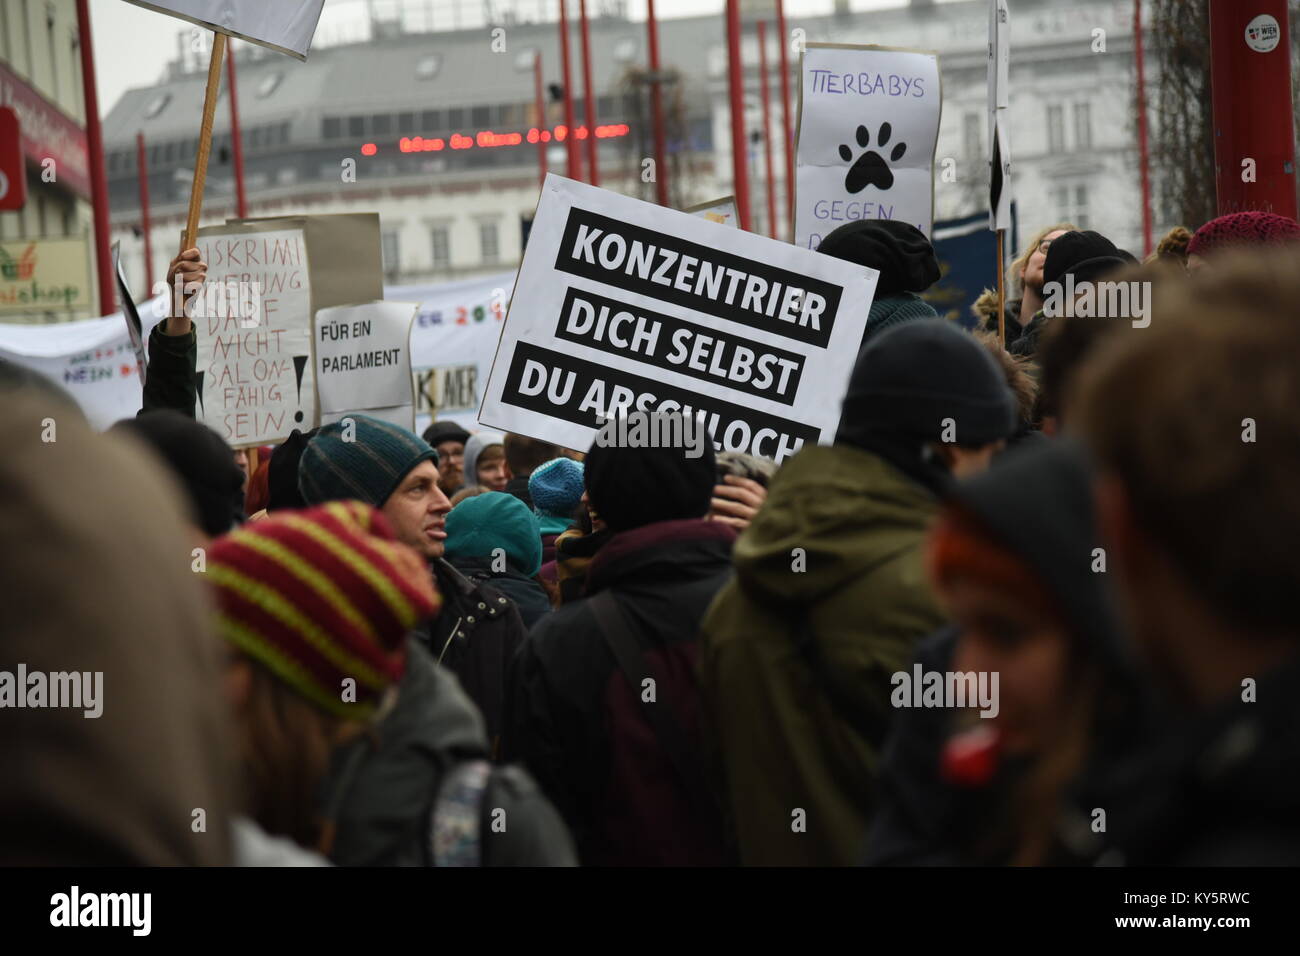 Vienna, Austria. 13th Jan, 2018. protesters on Vienna's main shopping street holding a sign critizing remarks made by Herbert Kickl, Austria's interior minister. Credit: Vincent Sufiyan/Alamy Live News Stock Photo